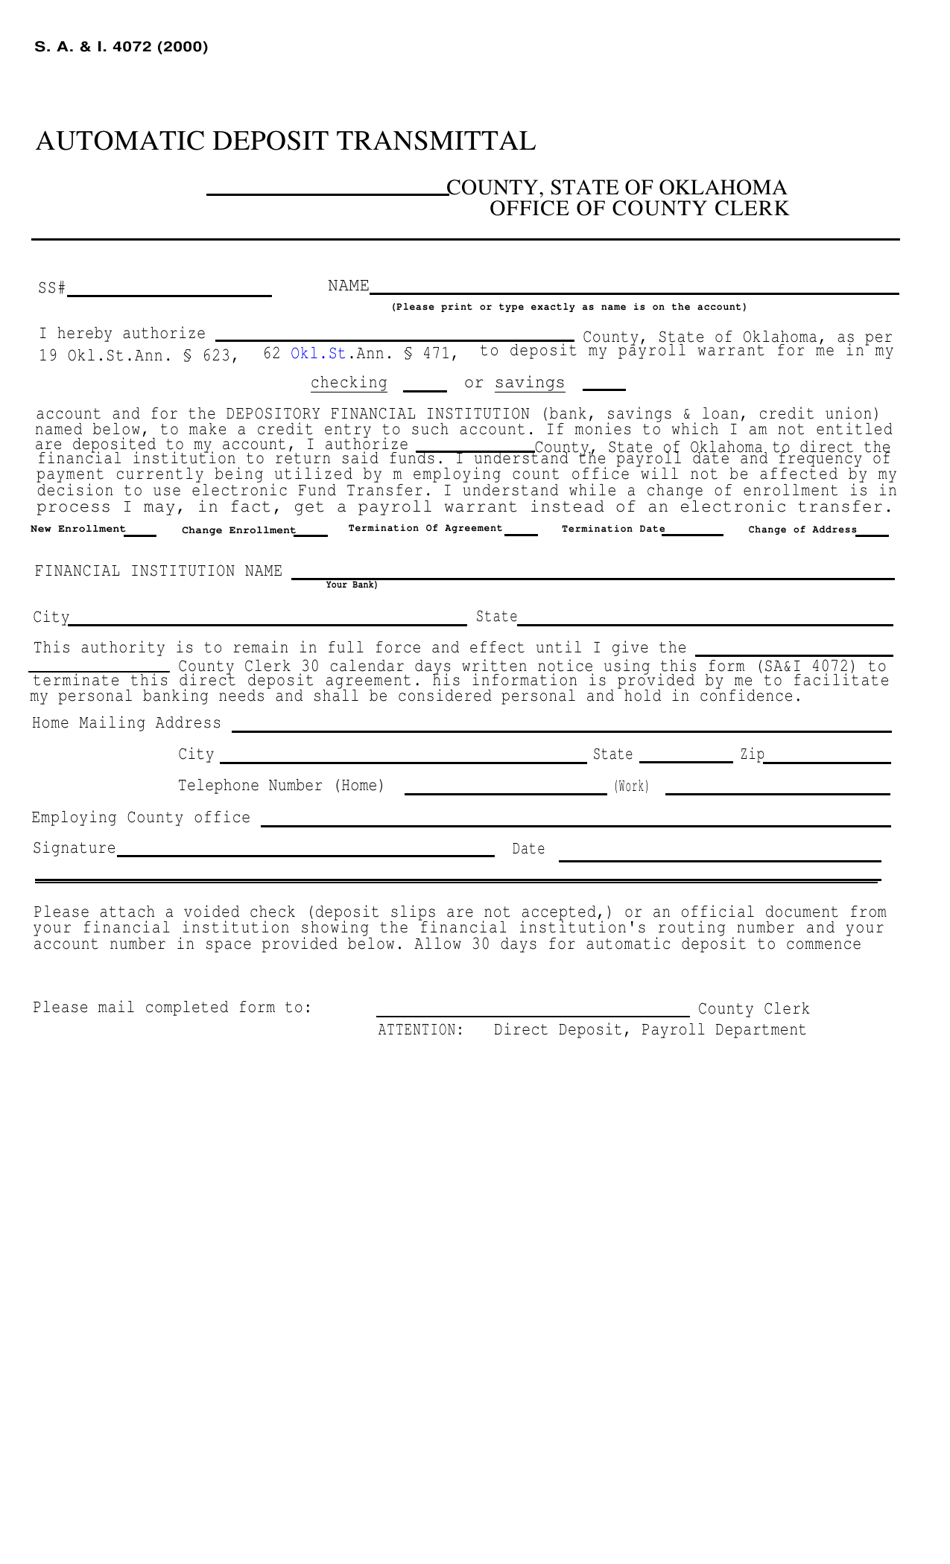 Form S.A. I.4072 Automatic Deposit Transmittal - Oklahoma, Page 1